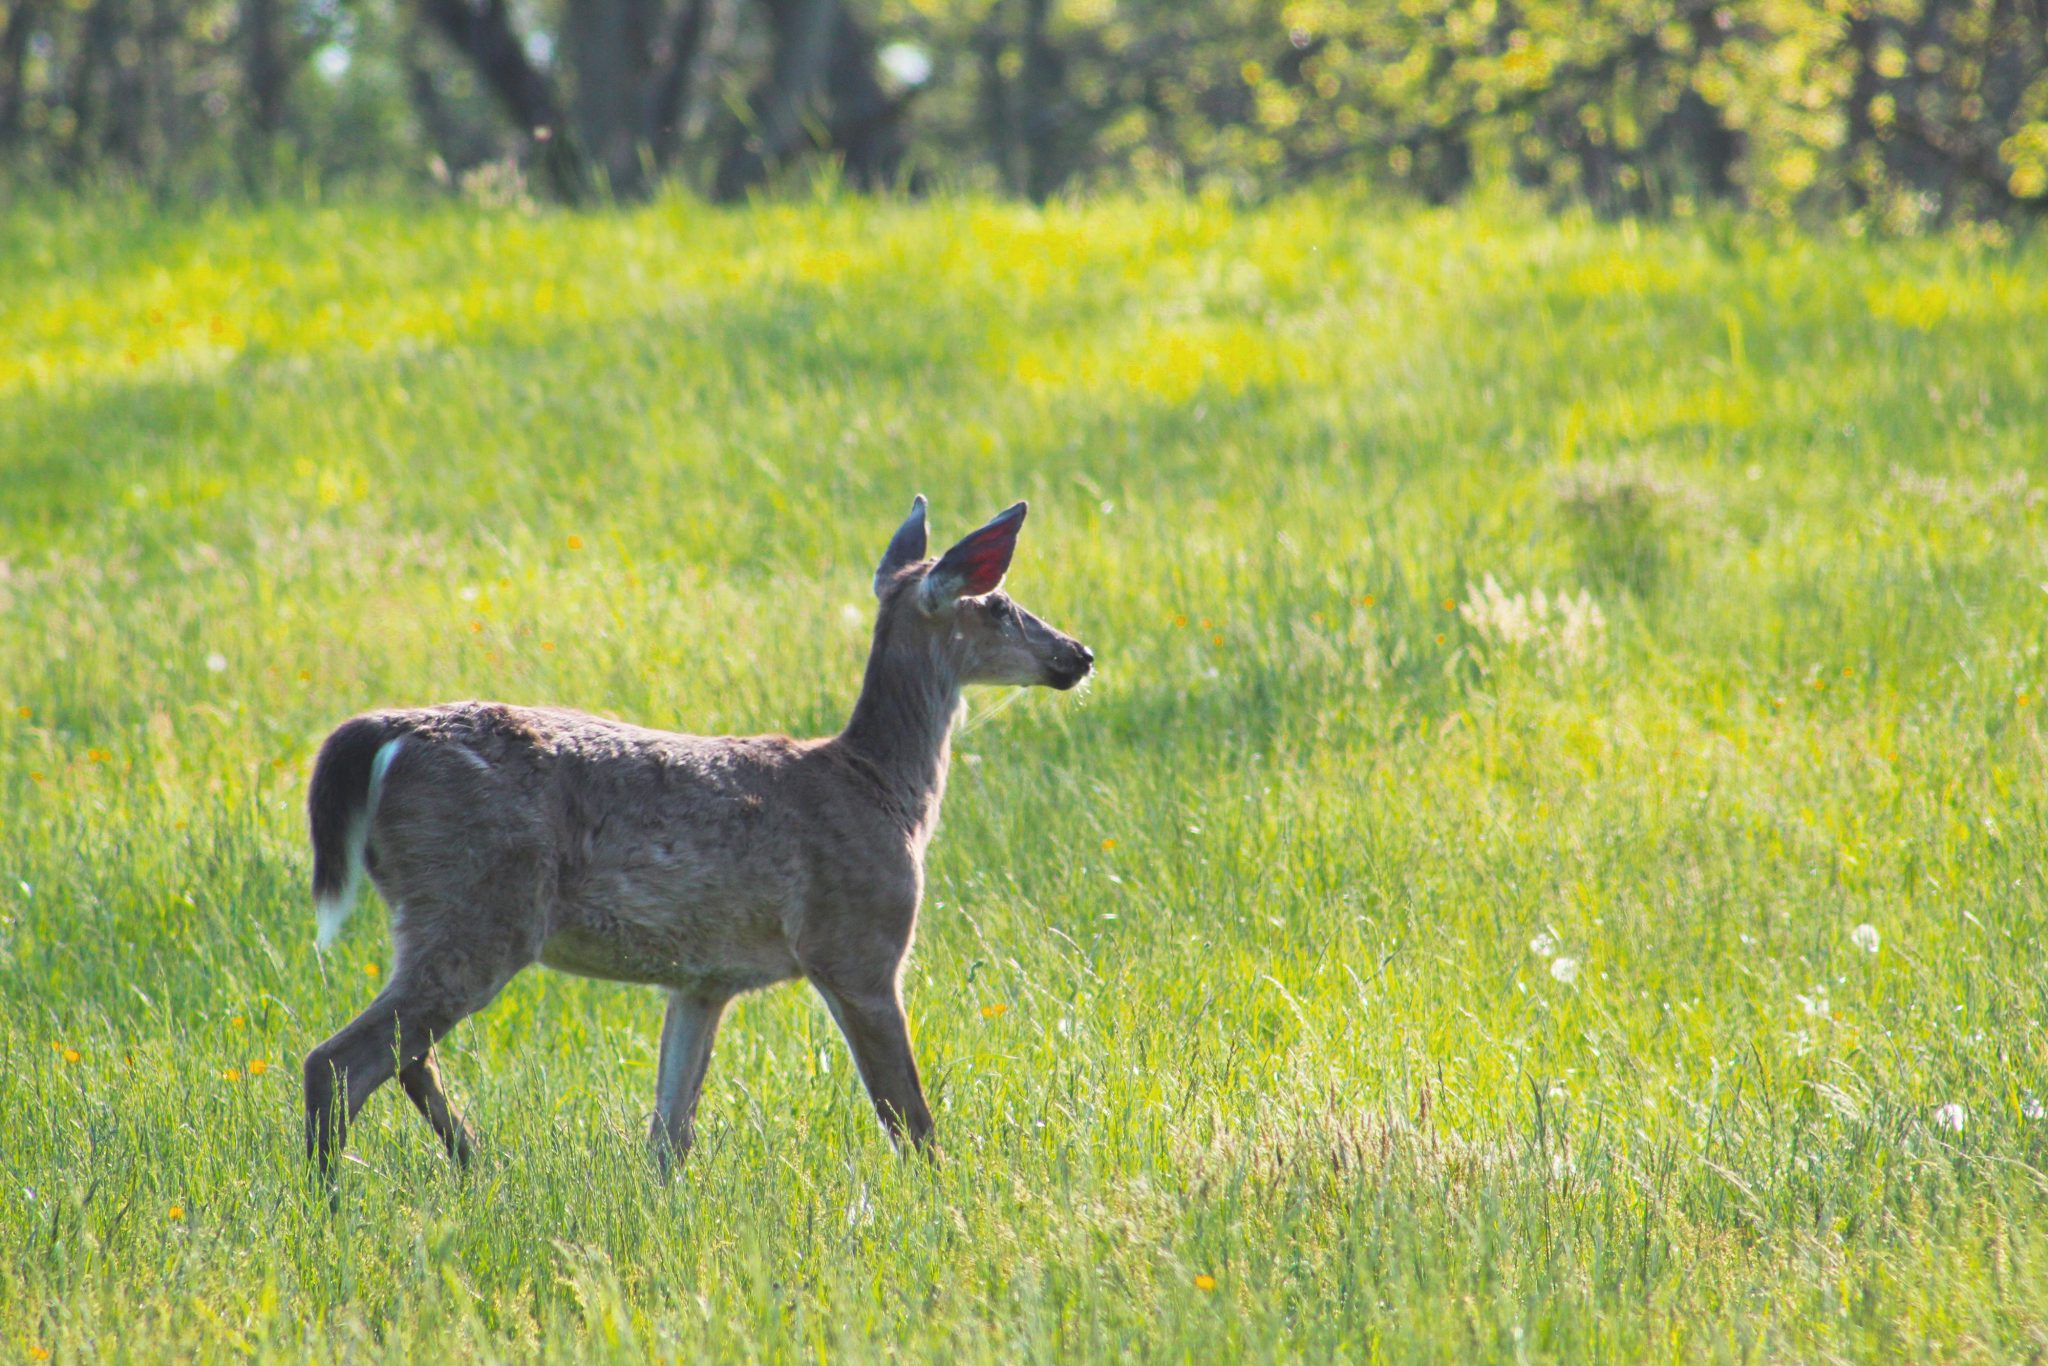 A deer pauses in a sunny meadow at Mendon Ponds Park in Henrietta, New York, USA